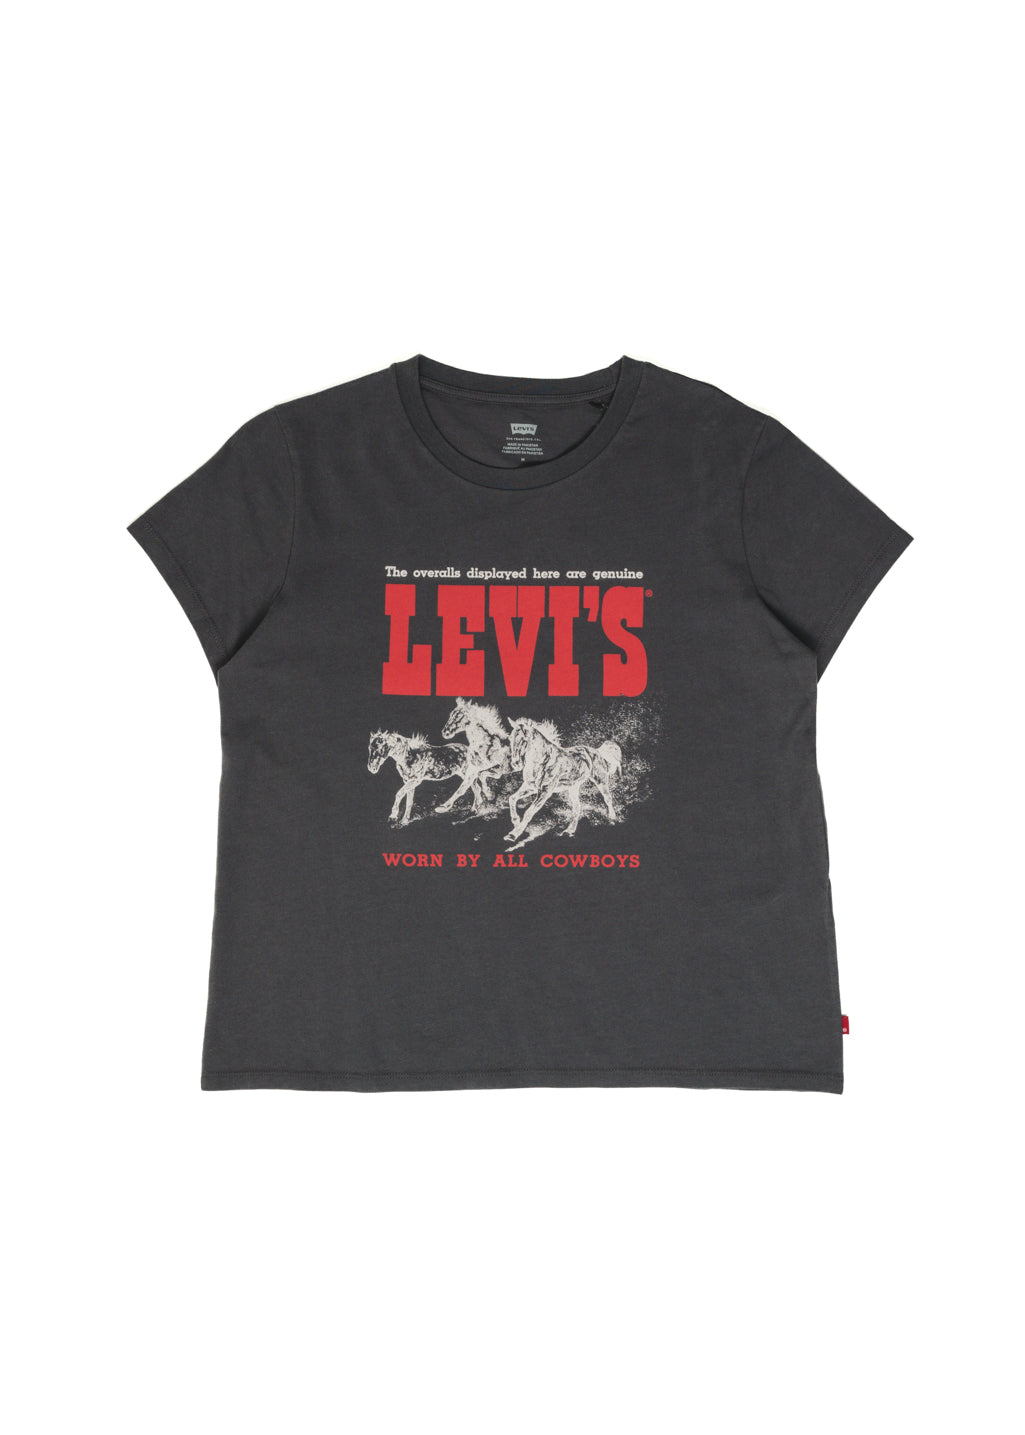 Levi's - The Perfect Tee - Horse Trio Black Oyster